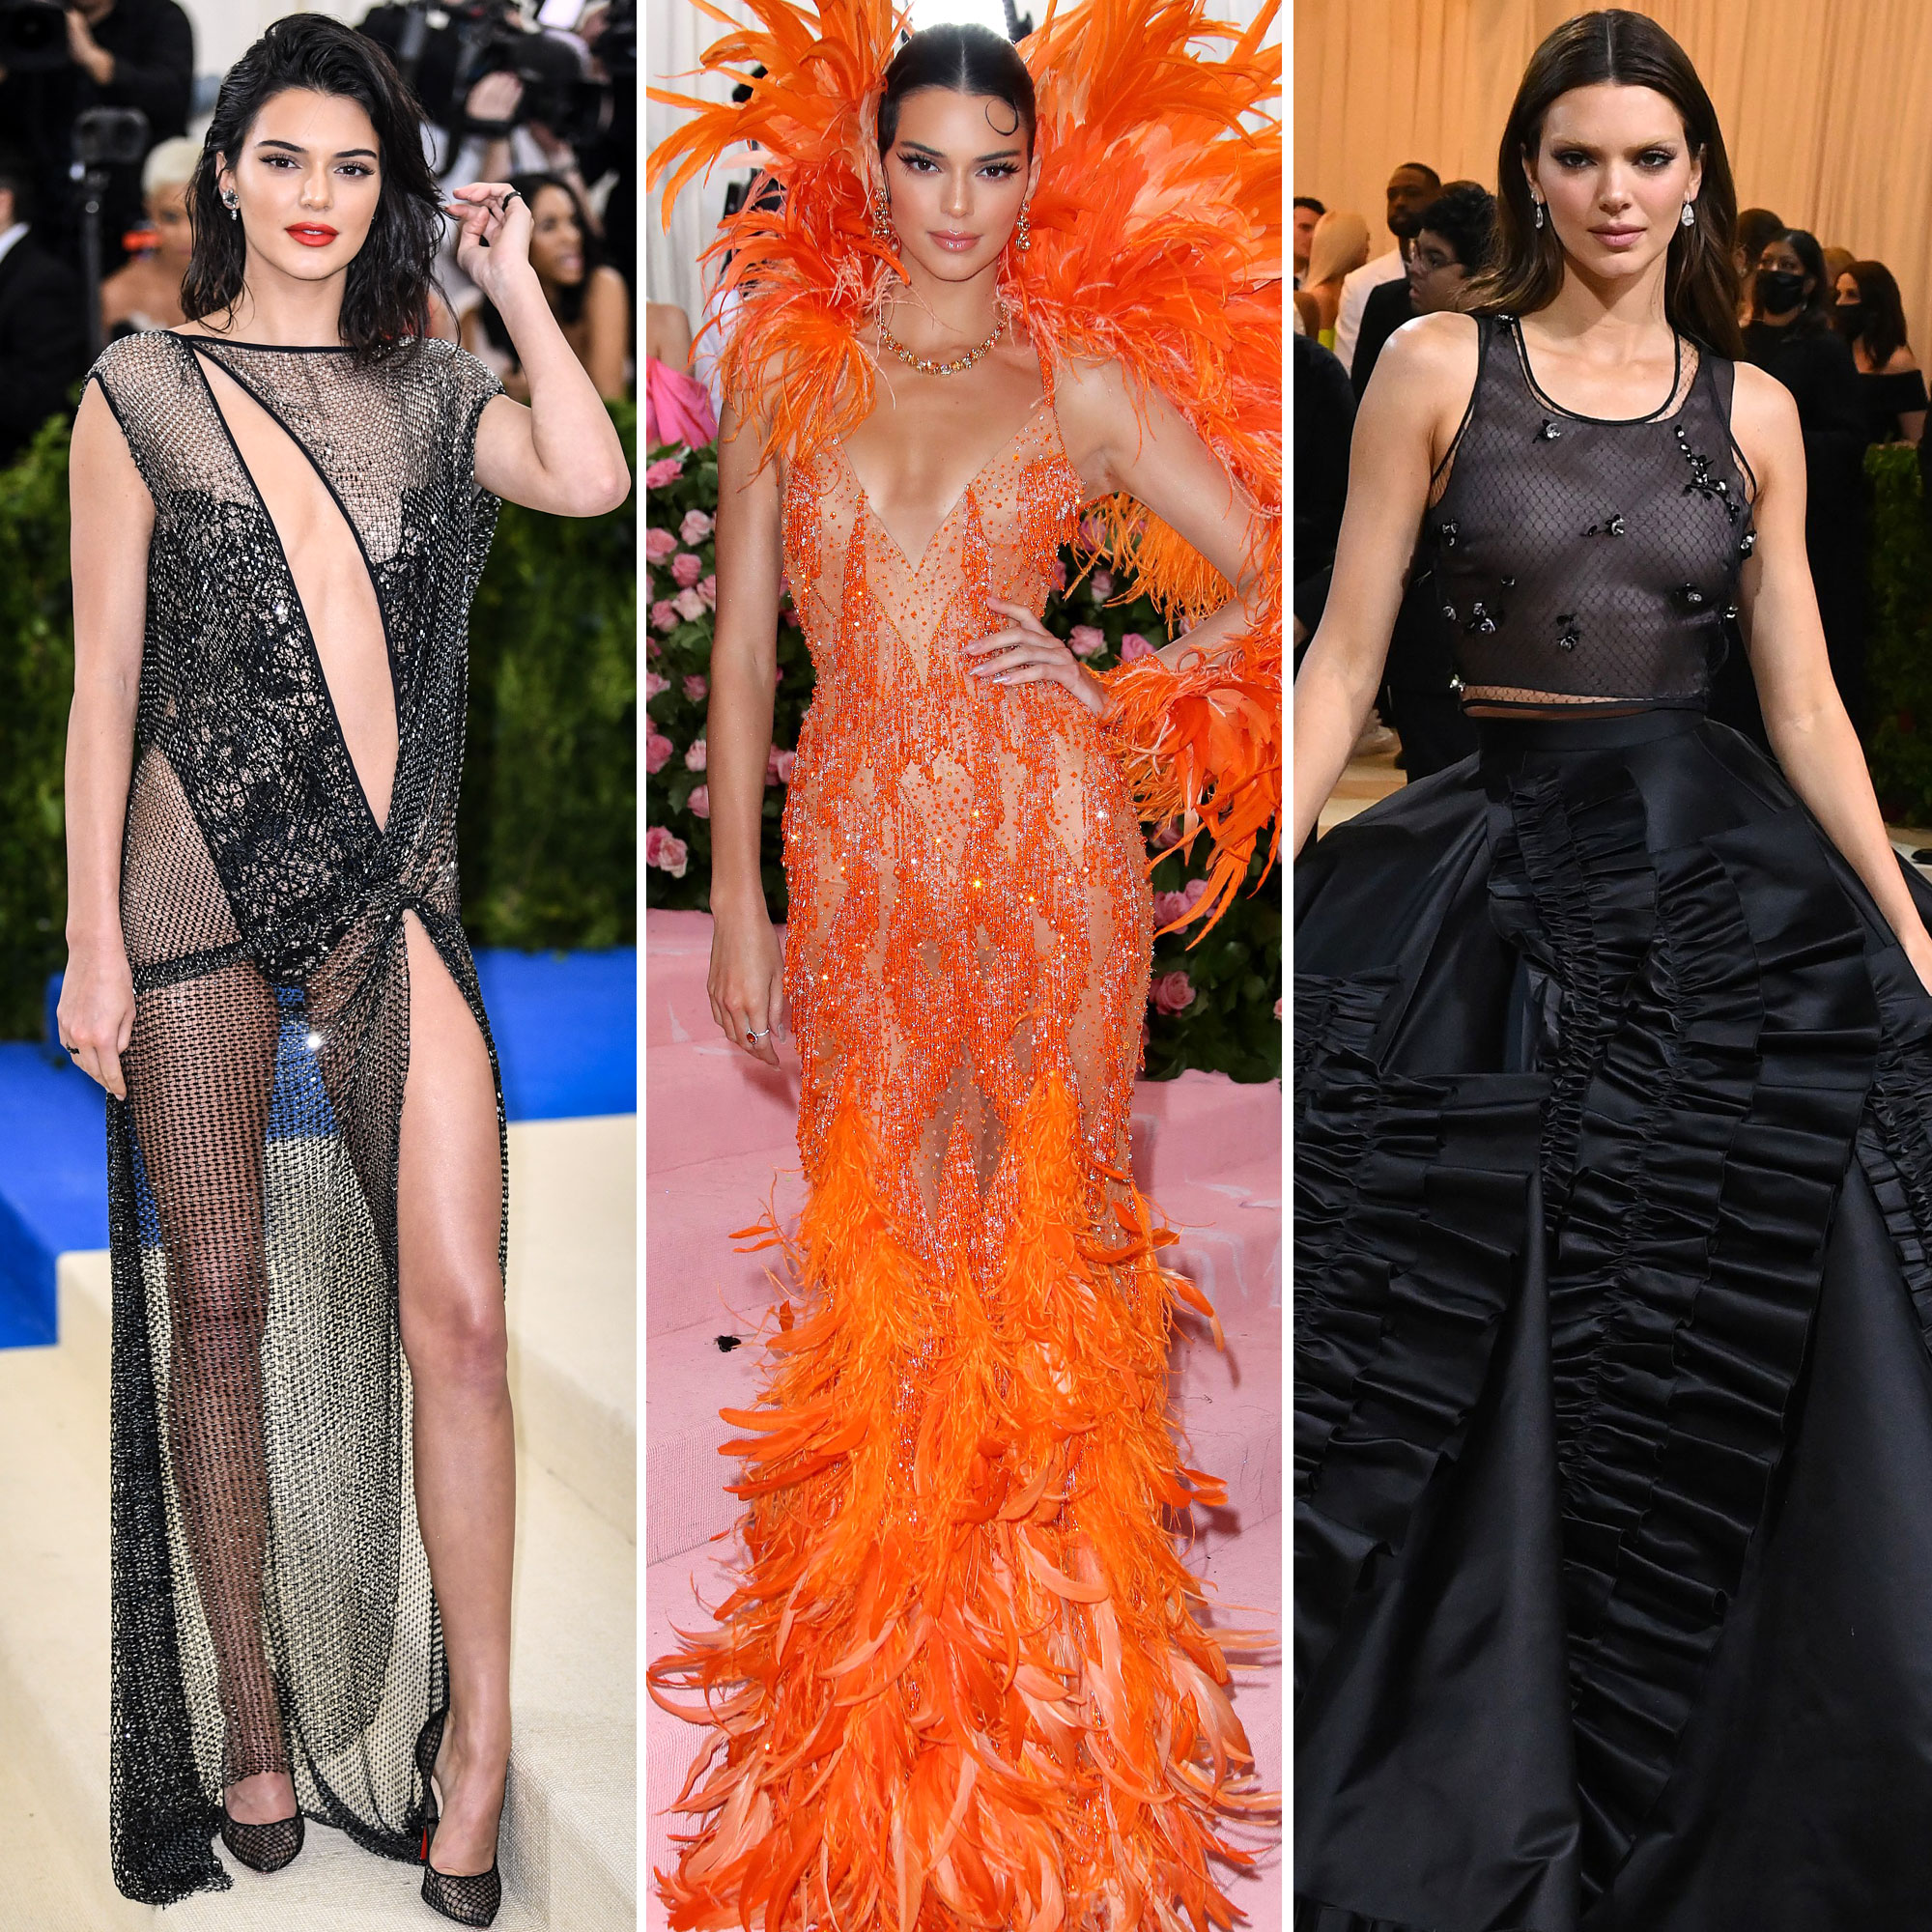 Kendall Jenner's Best Met Gala Looks Through the Years: Pics